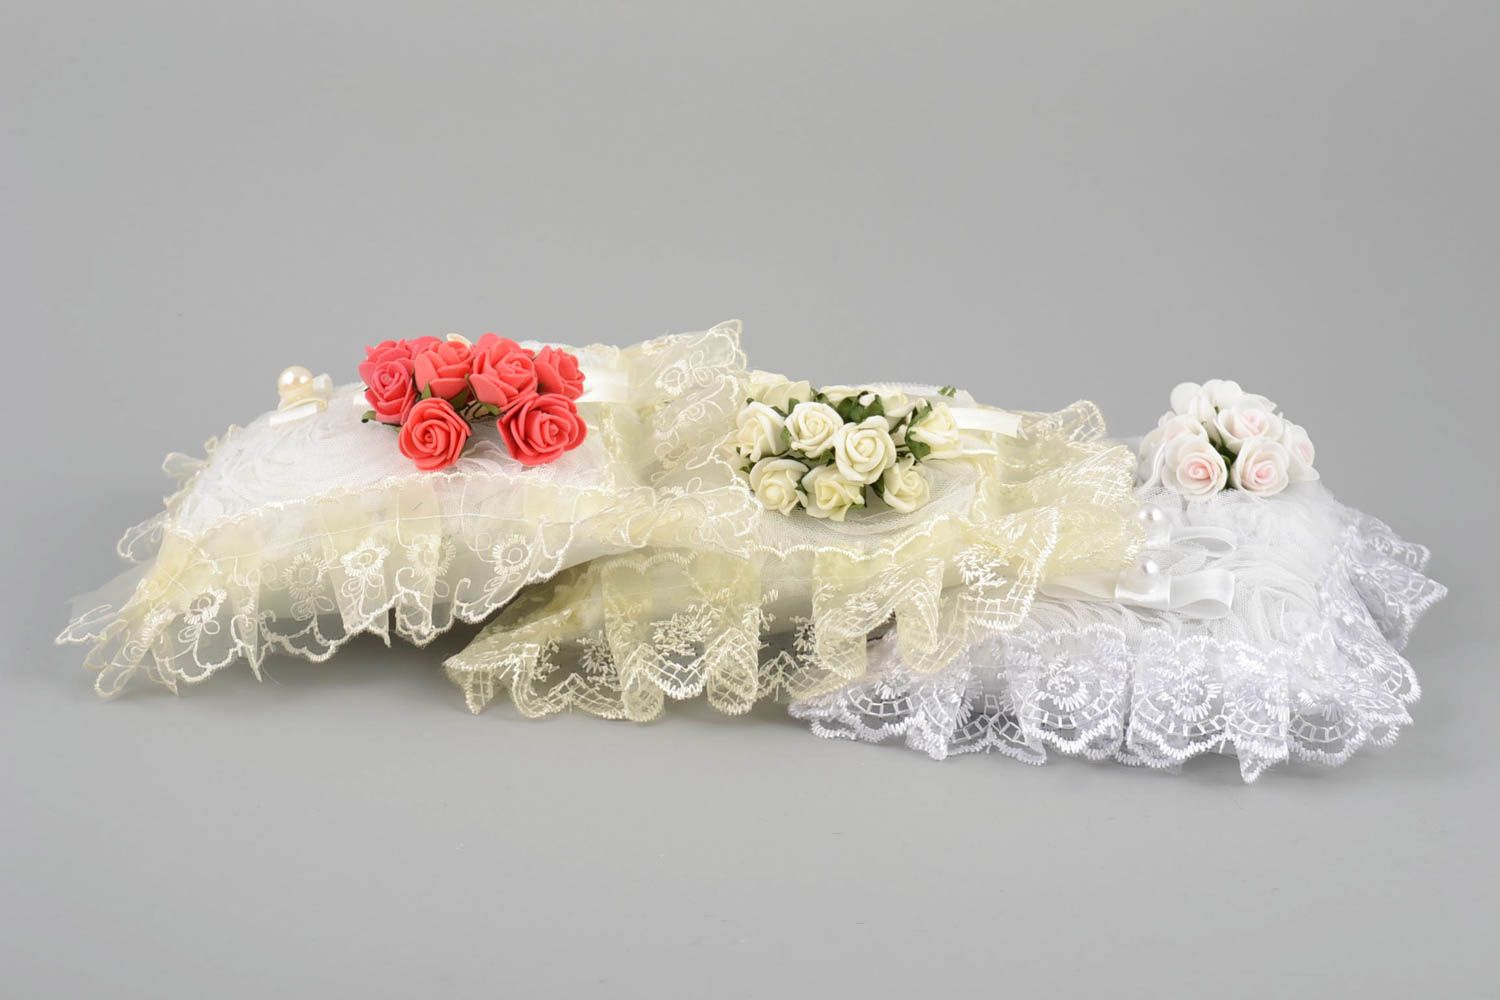 Handmade wedding openwork set of white pillows for rings with flowers 3 pieces photo 4